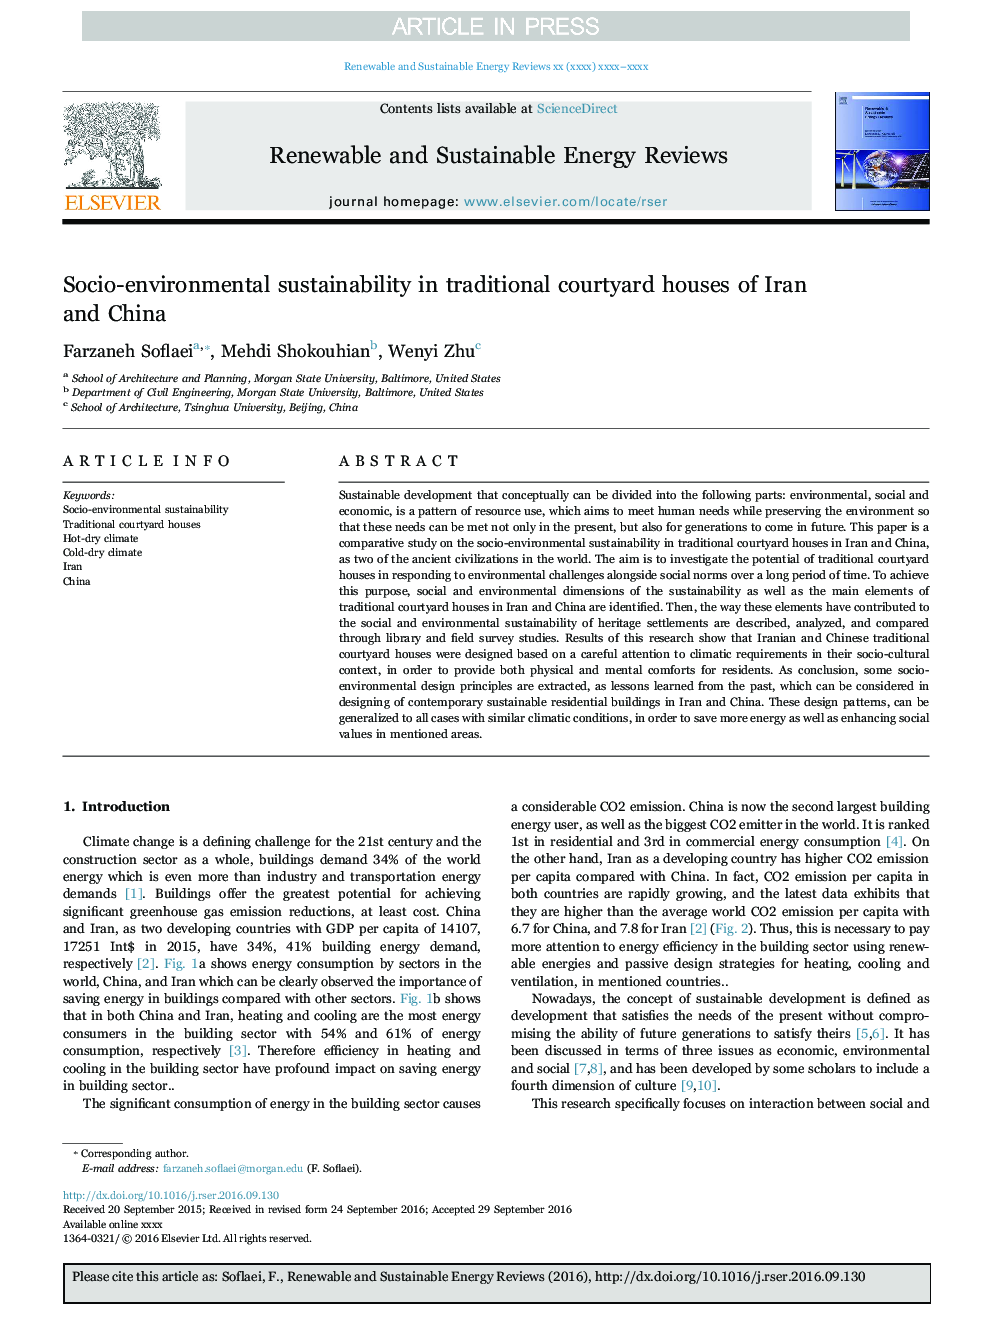 Socio-environmental sustainability in traditional courtyard houses of Iran and China